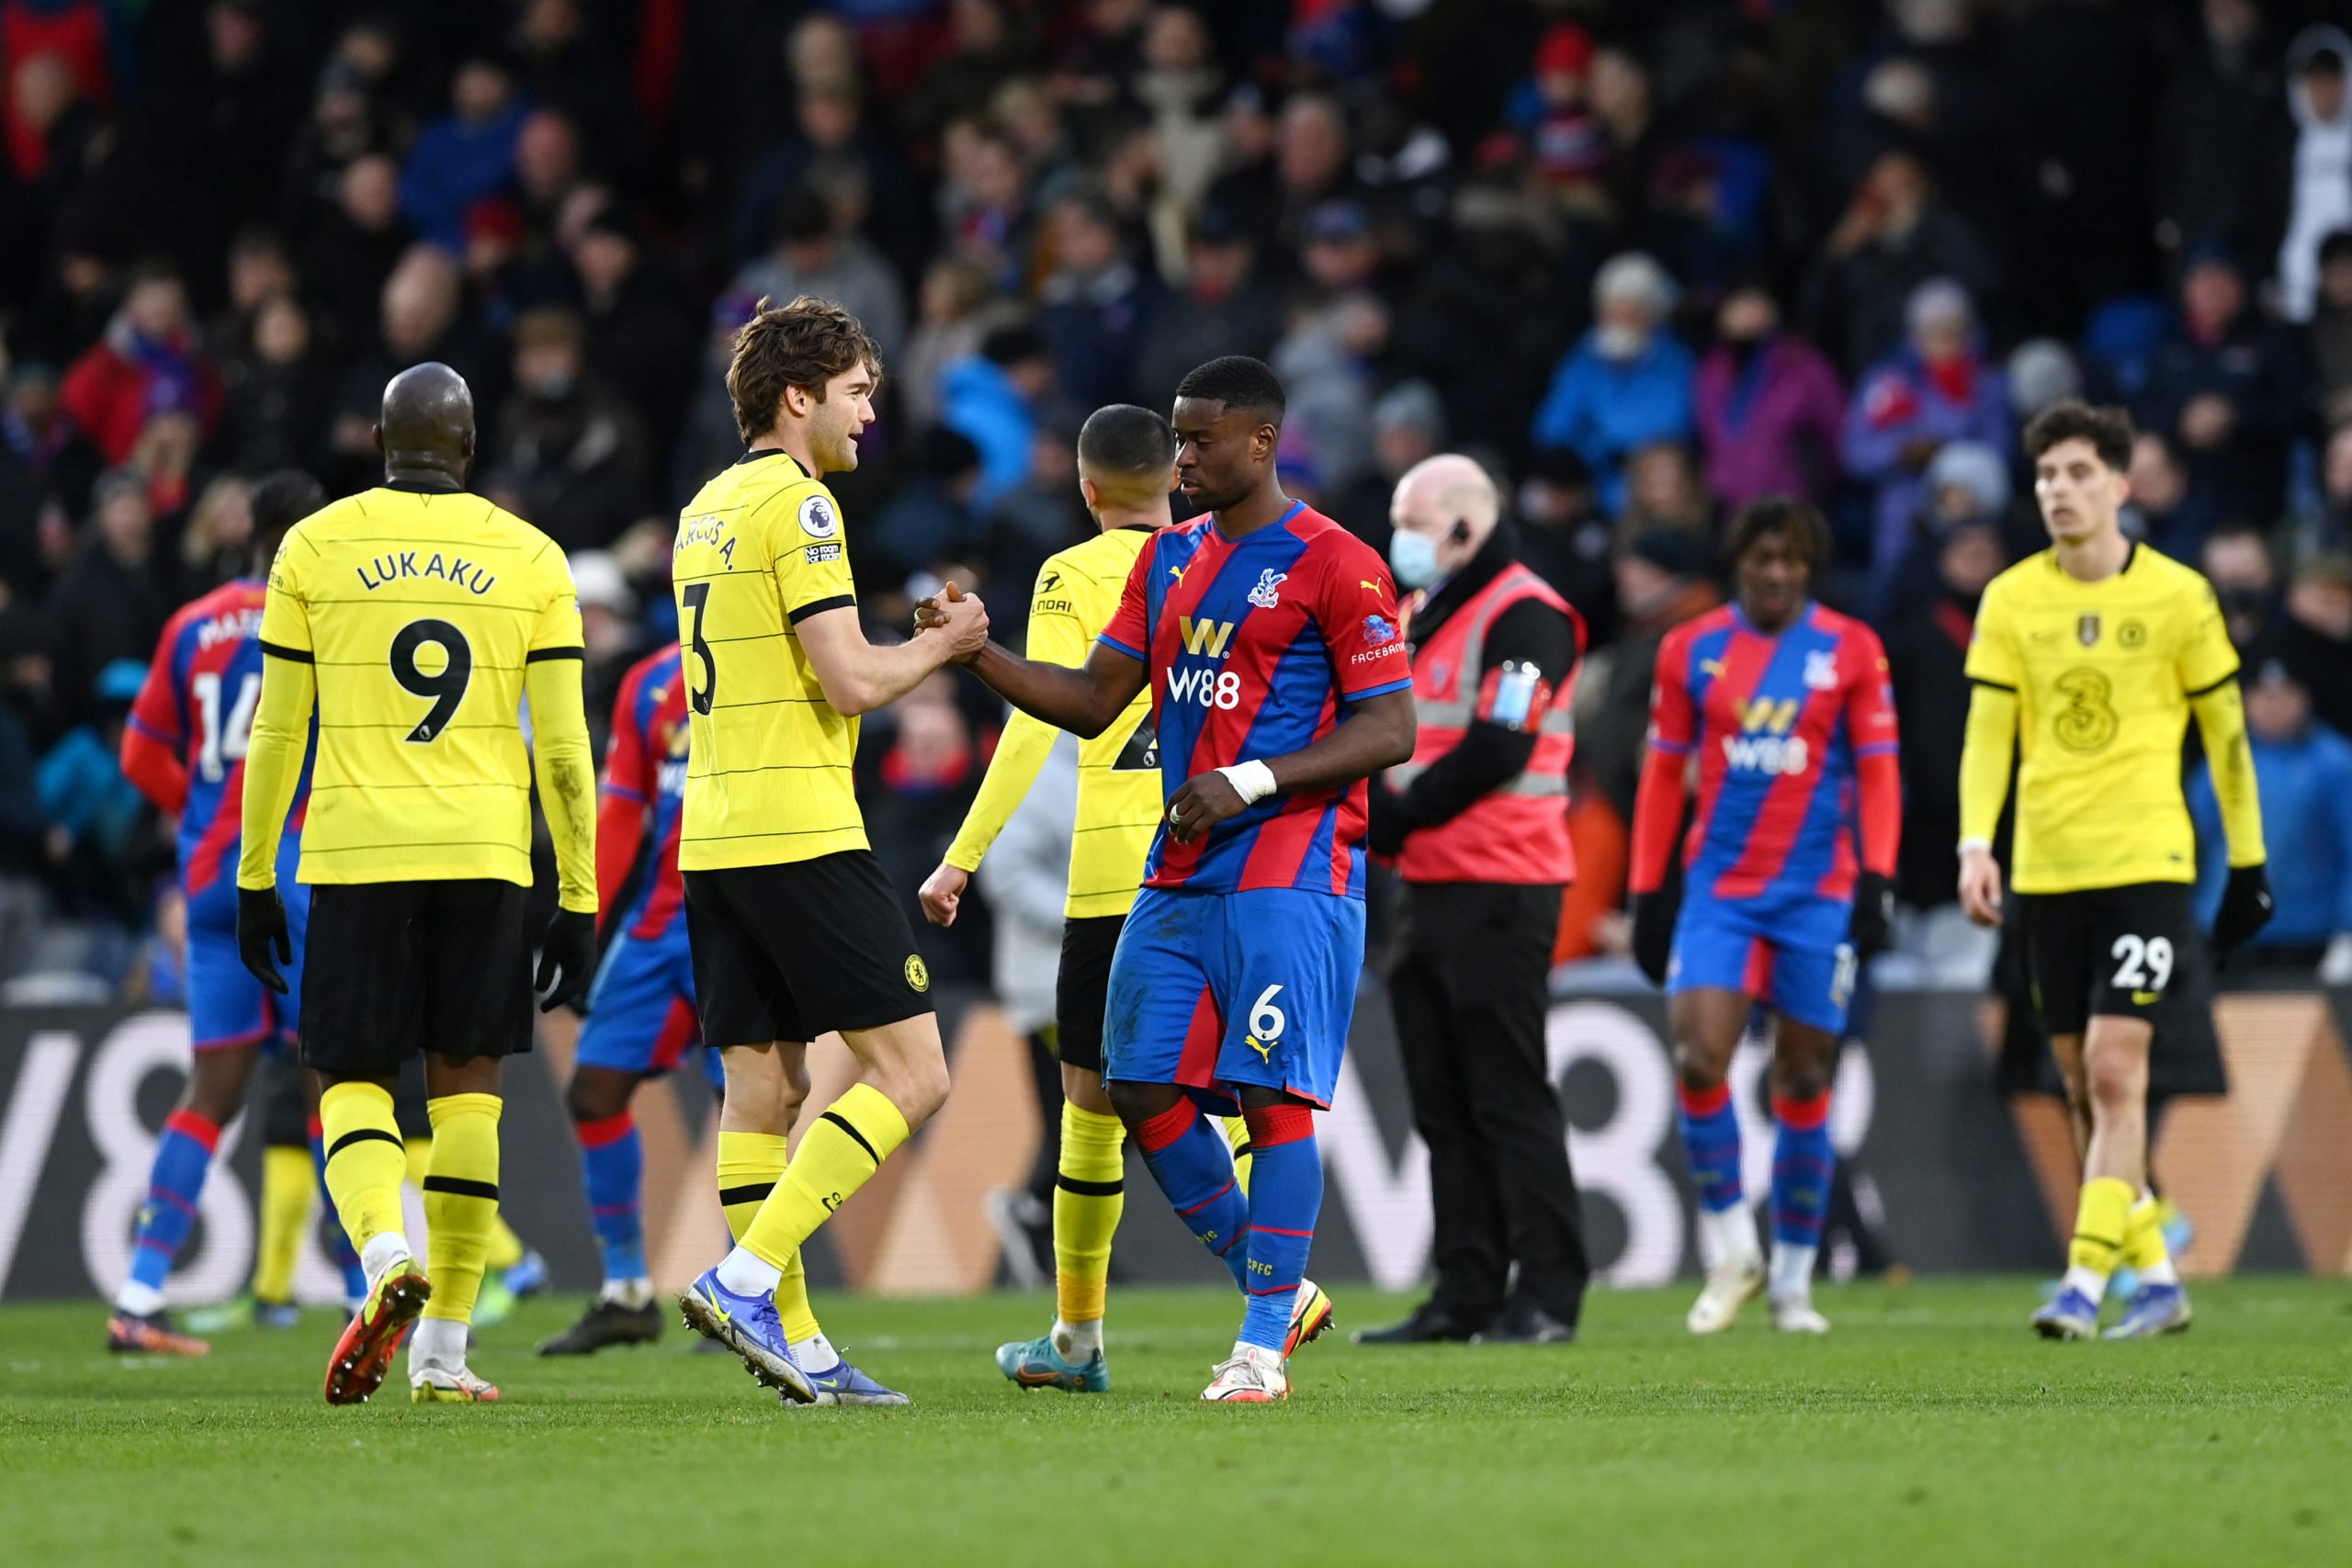 'Amazing': Some Chelsea fans hail substitute's cameo in 1-0 Crystal Palace win